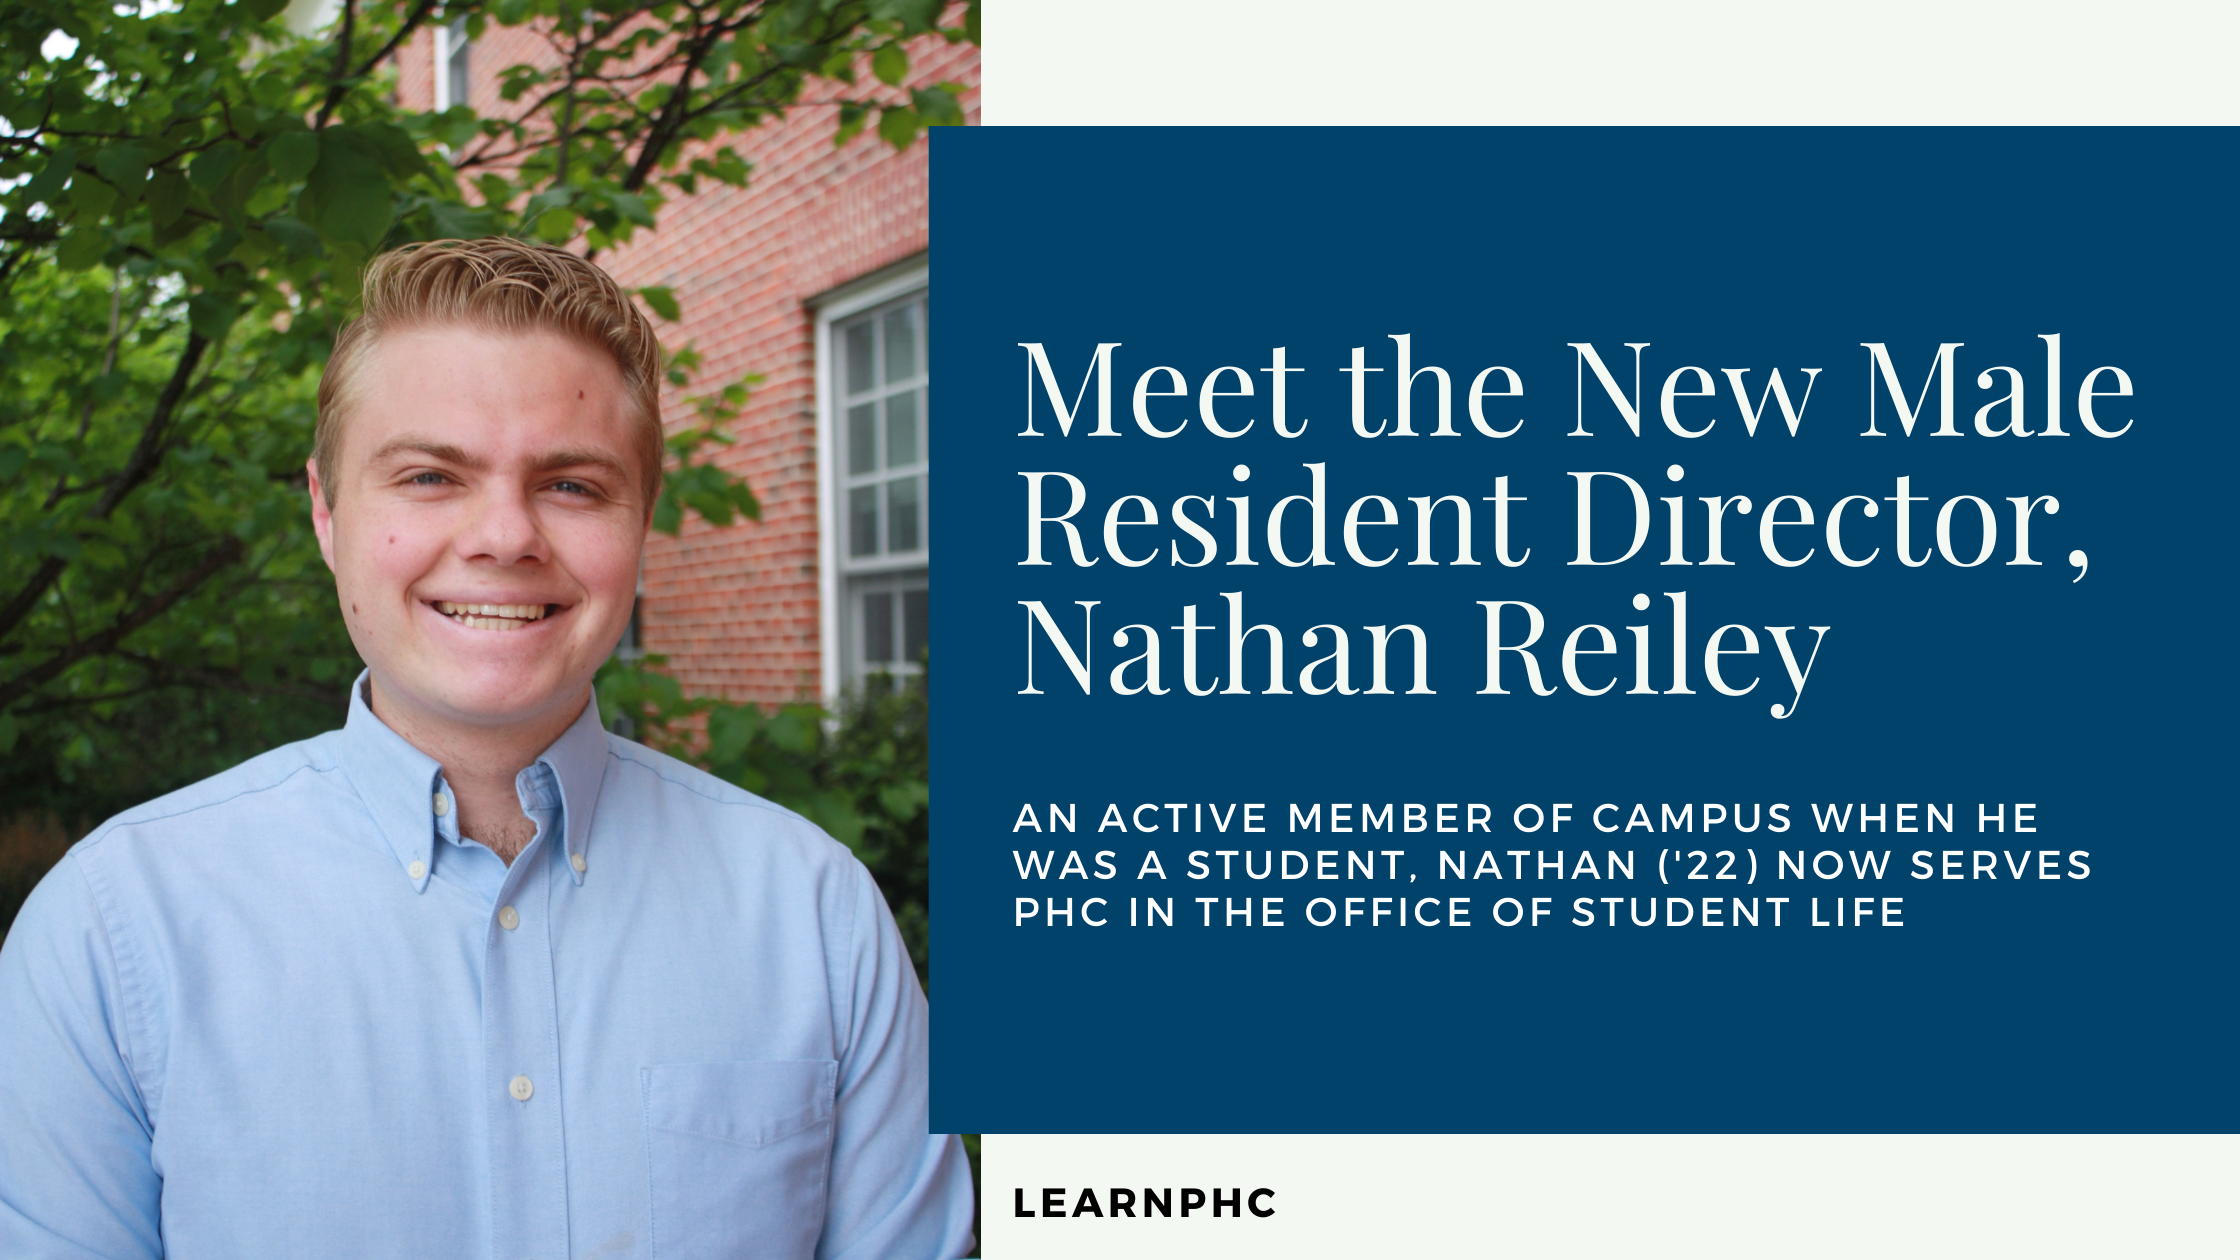 Meet the New Male Resident Director, Nathan Reiley